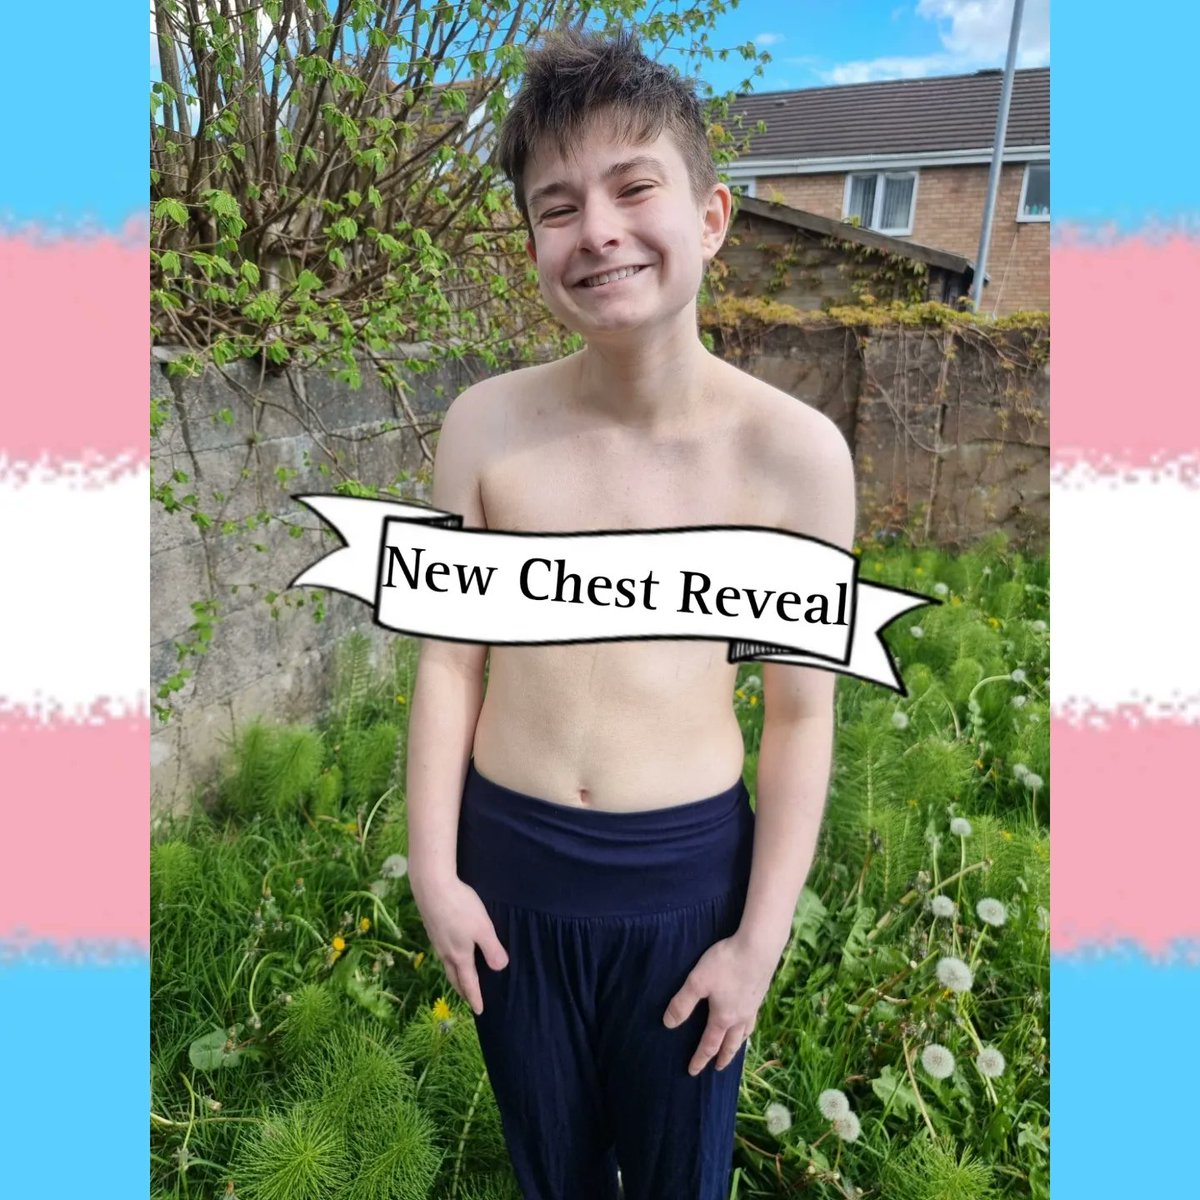 New Chest Just Dropped 🥳🎊
I can't put into words the joy and relief these past 10 days have brought let alone what I feel now I can look at it any time I want to 🥹
#TopSurgery #TopSurgeryRecovery #Trans #TransJoy #TransHealthcare #GenderAffirmingCare #GenderAffirmingHealthcare